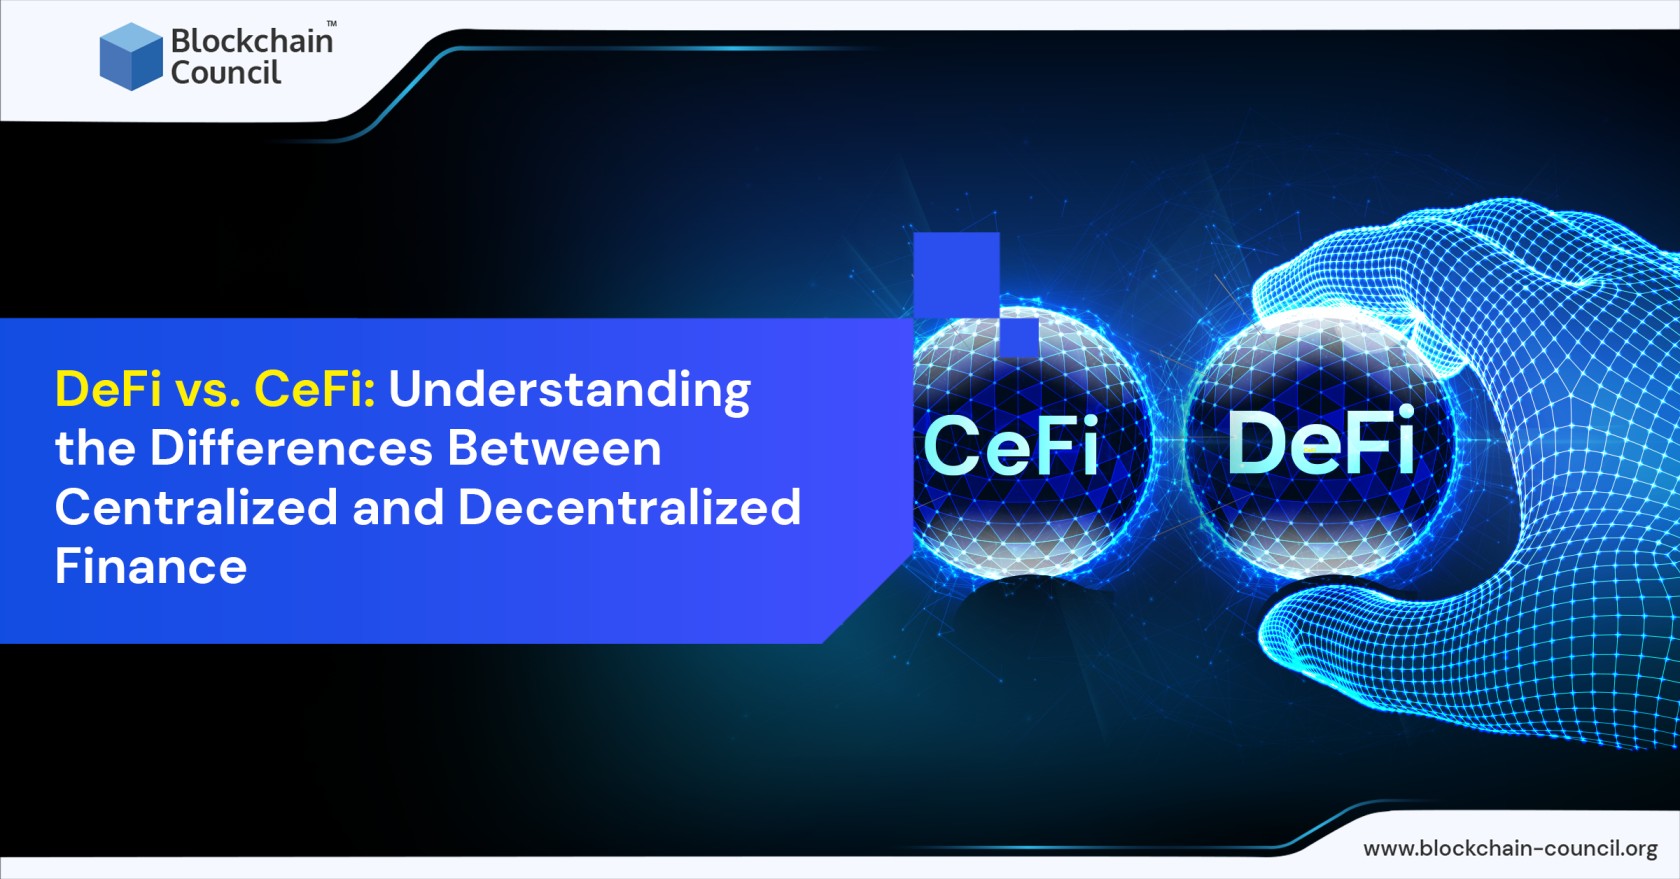 DeFi vs. CeFi: Understanding the Differences Between Centralized and Decentralized Finance